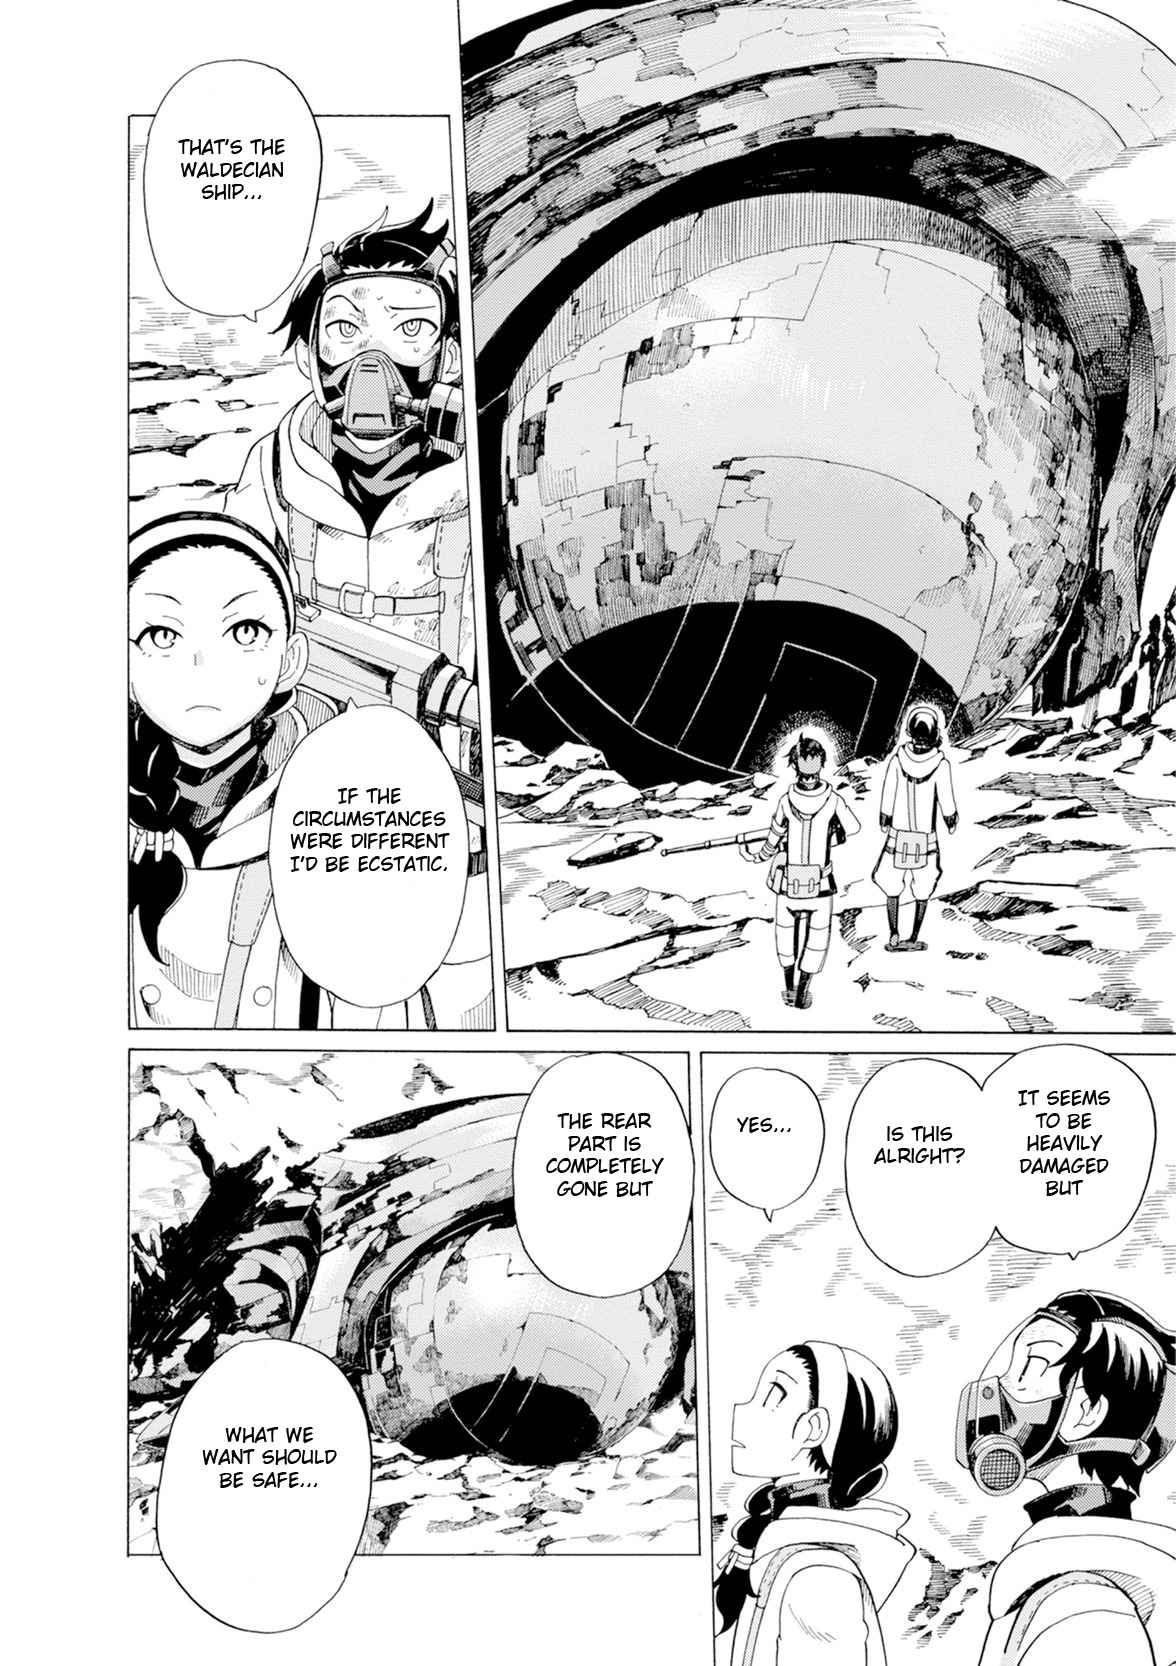 Asebi and Adventurers of Sky World Vol. 6 Ch. 26 Ancient ship and mysterious Licorice